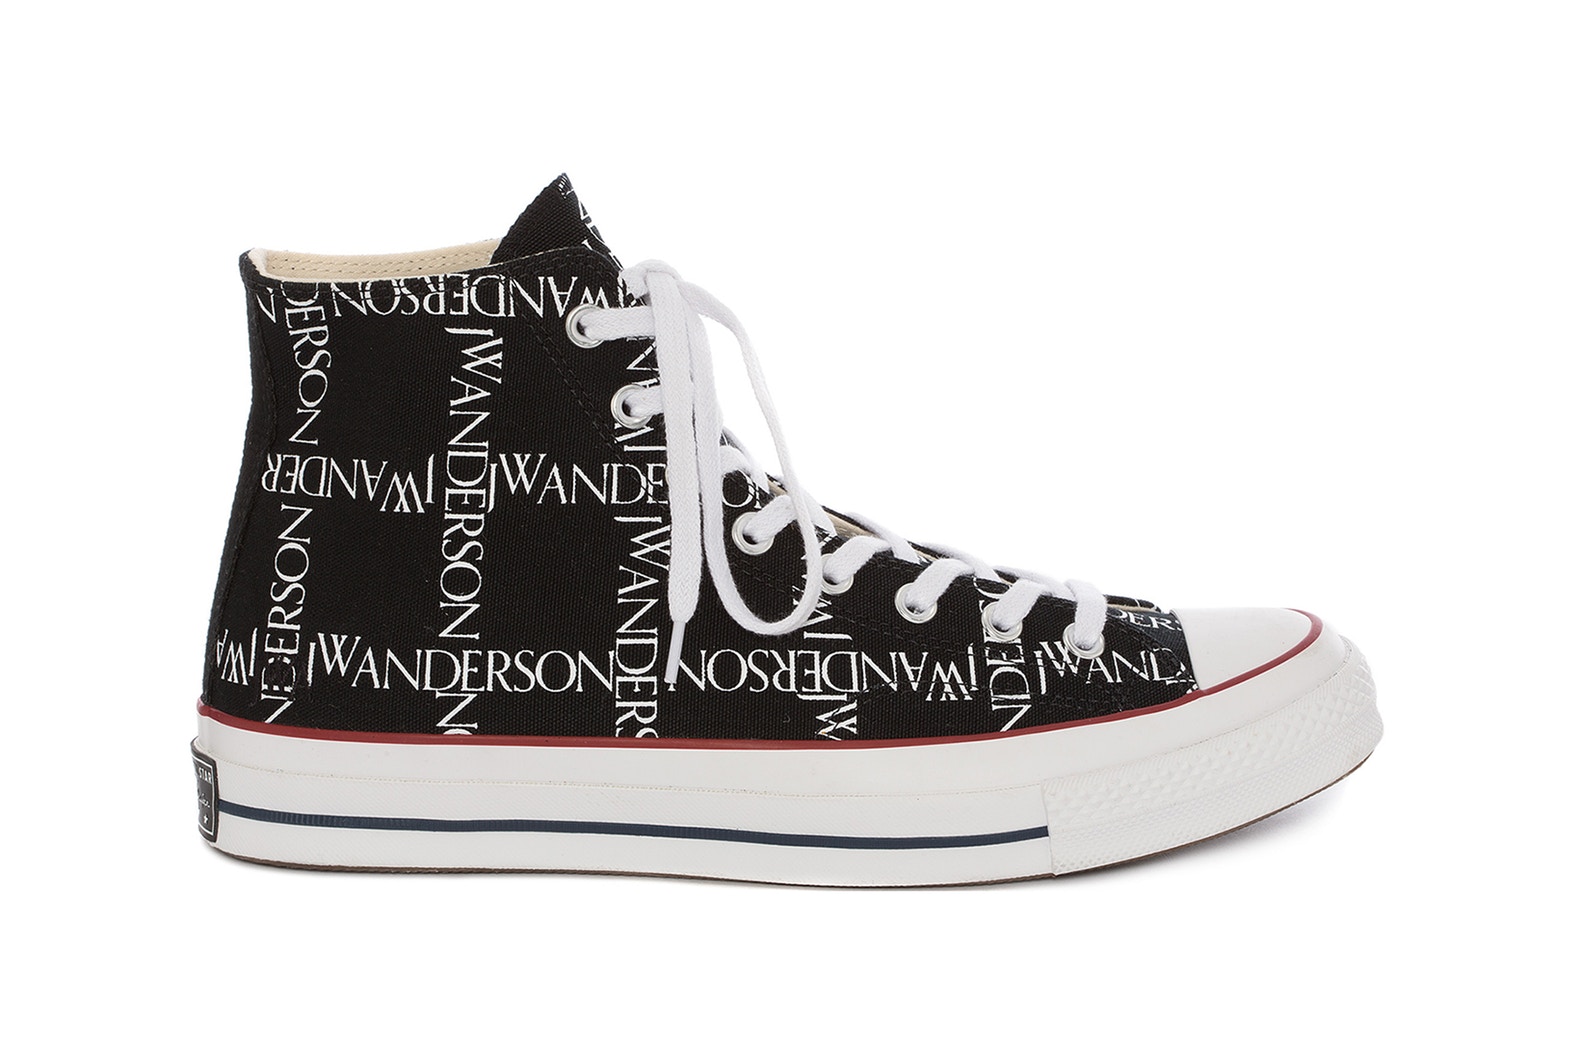 J.W. Anderson x Converse Announce Chuck Taylor All Star Collaborations ...